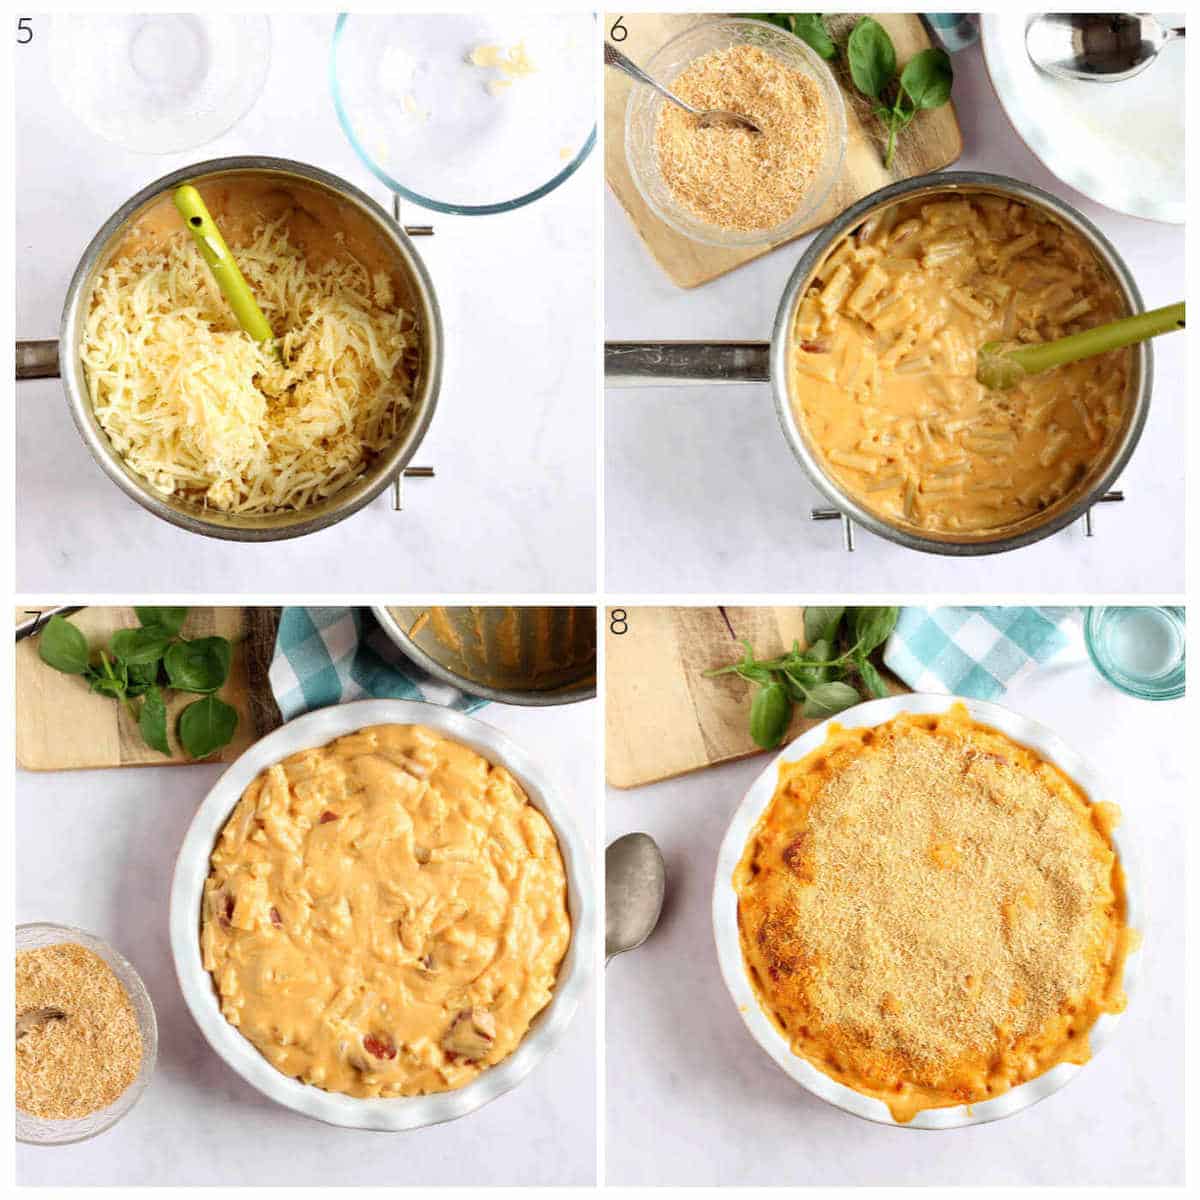 Step-by-step instructions for making Mac and Cheese steps 5-8